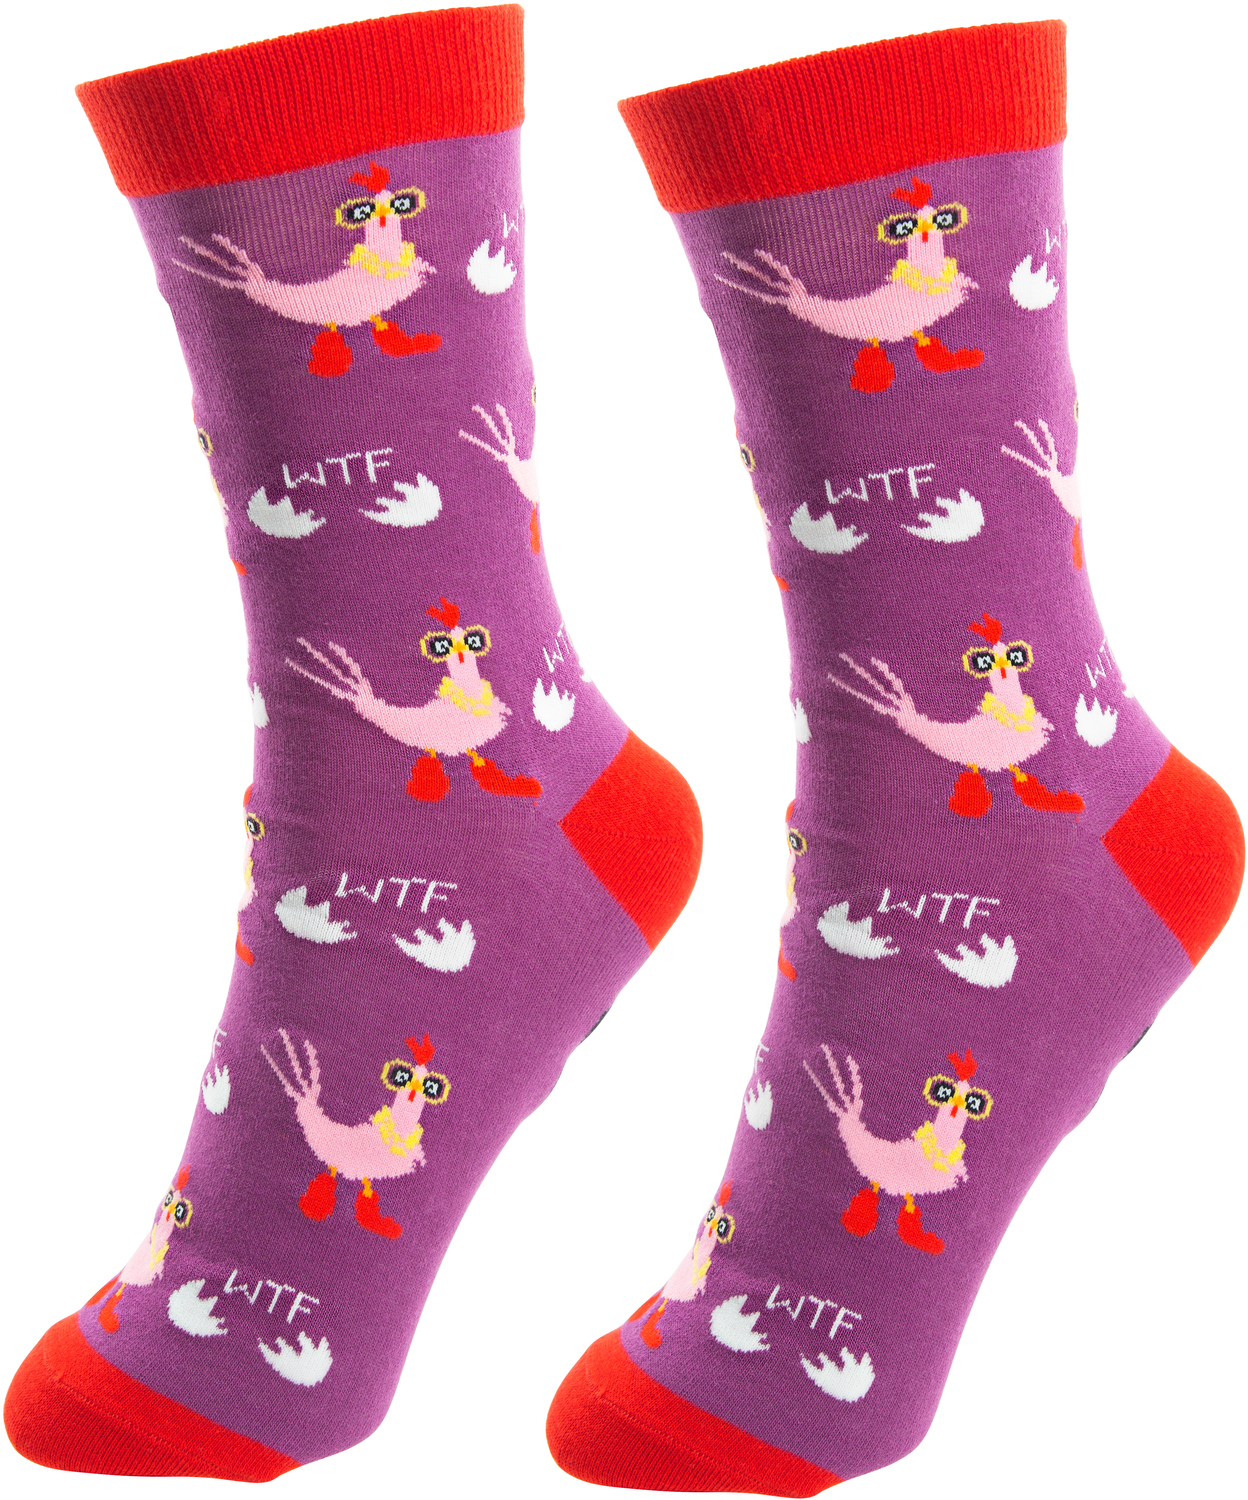 Cluck Off by Fugly Friends - Cluck Off - M/L Unisex Cotton Blend Sock